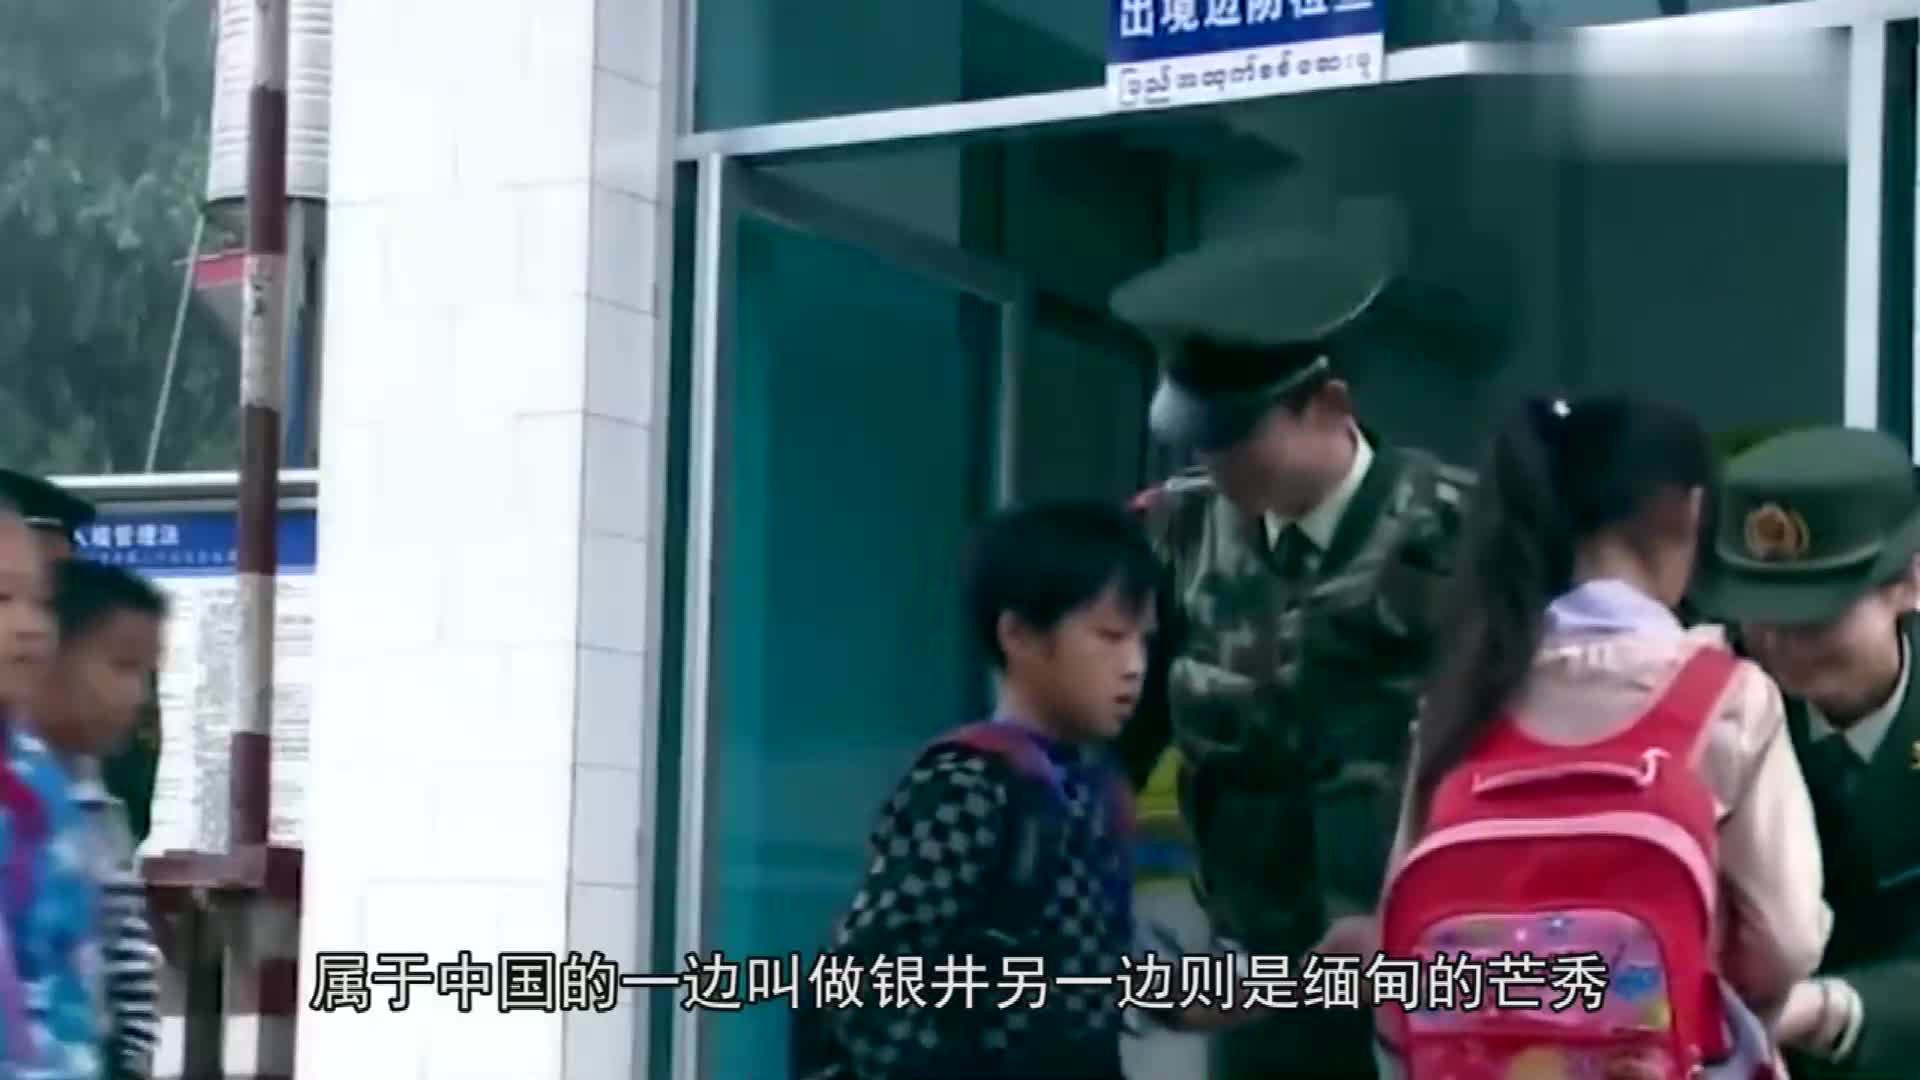 China's most embarrassing border, buy a dish to go abroad, the villagers never need a visa!